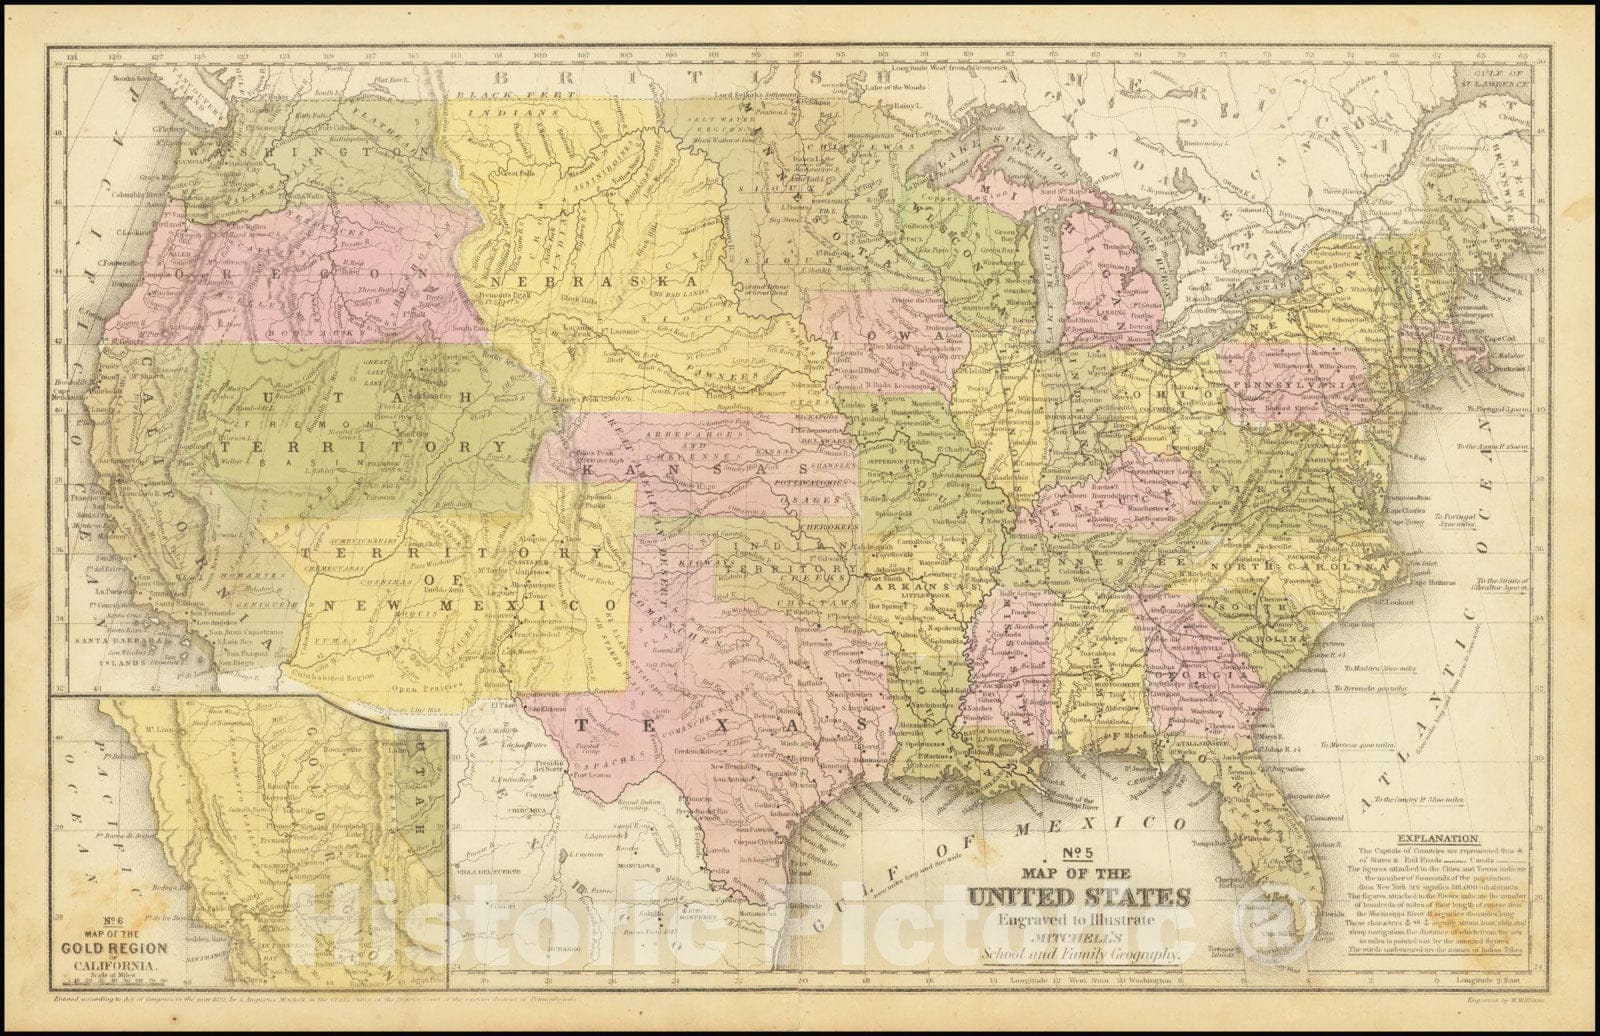 Historic Map : No. 5 United States Engraved to Illustrate Mitchell's School and Family Geography , 1852, Vintage Wall Art